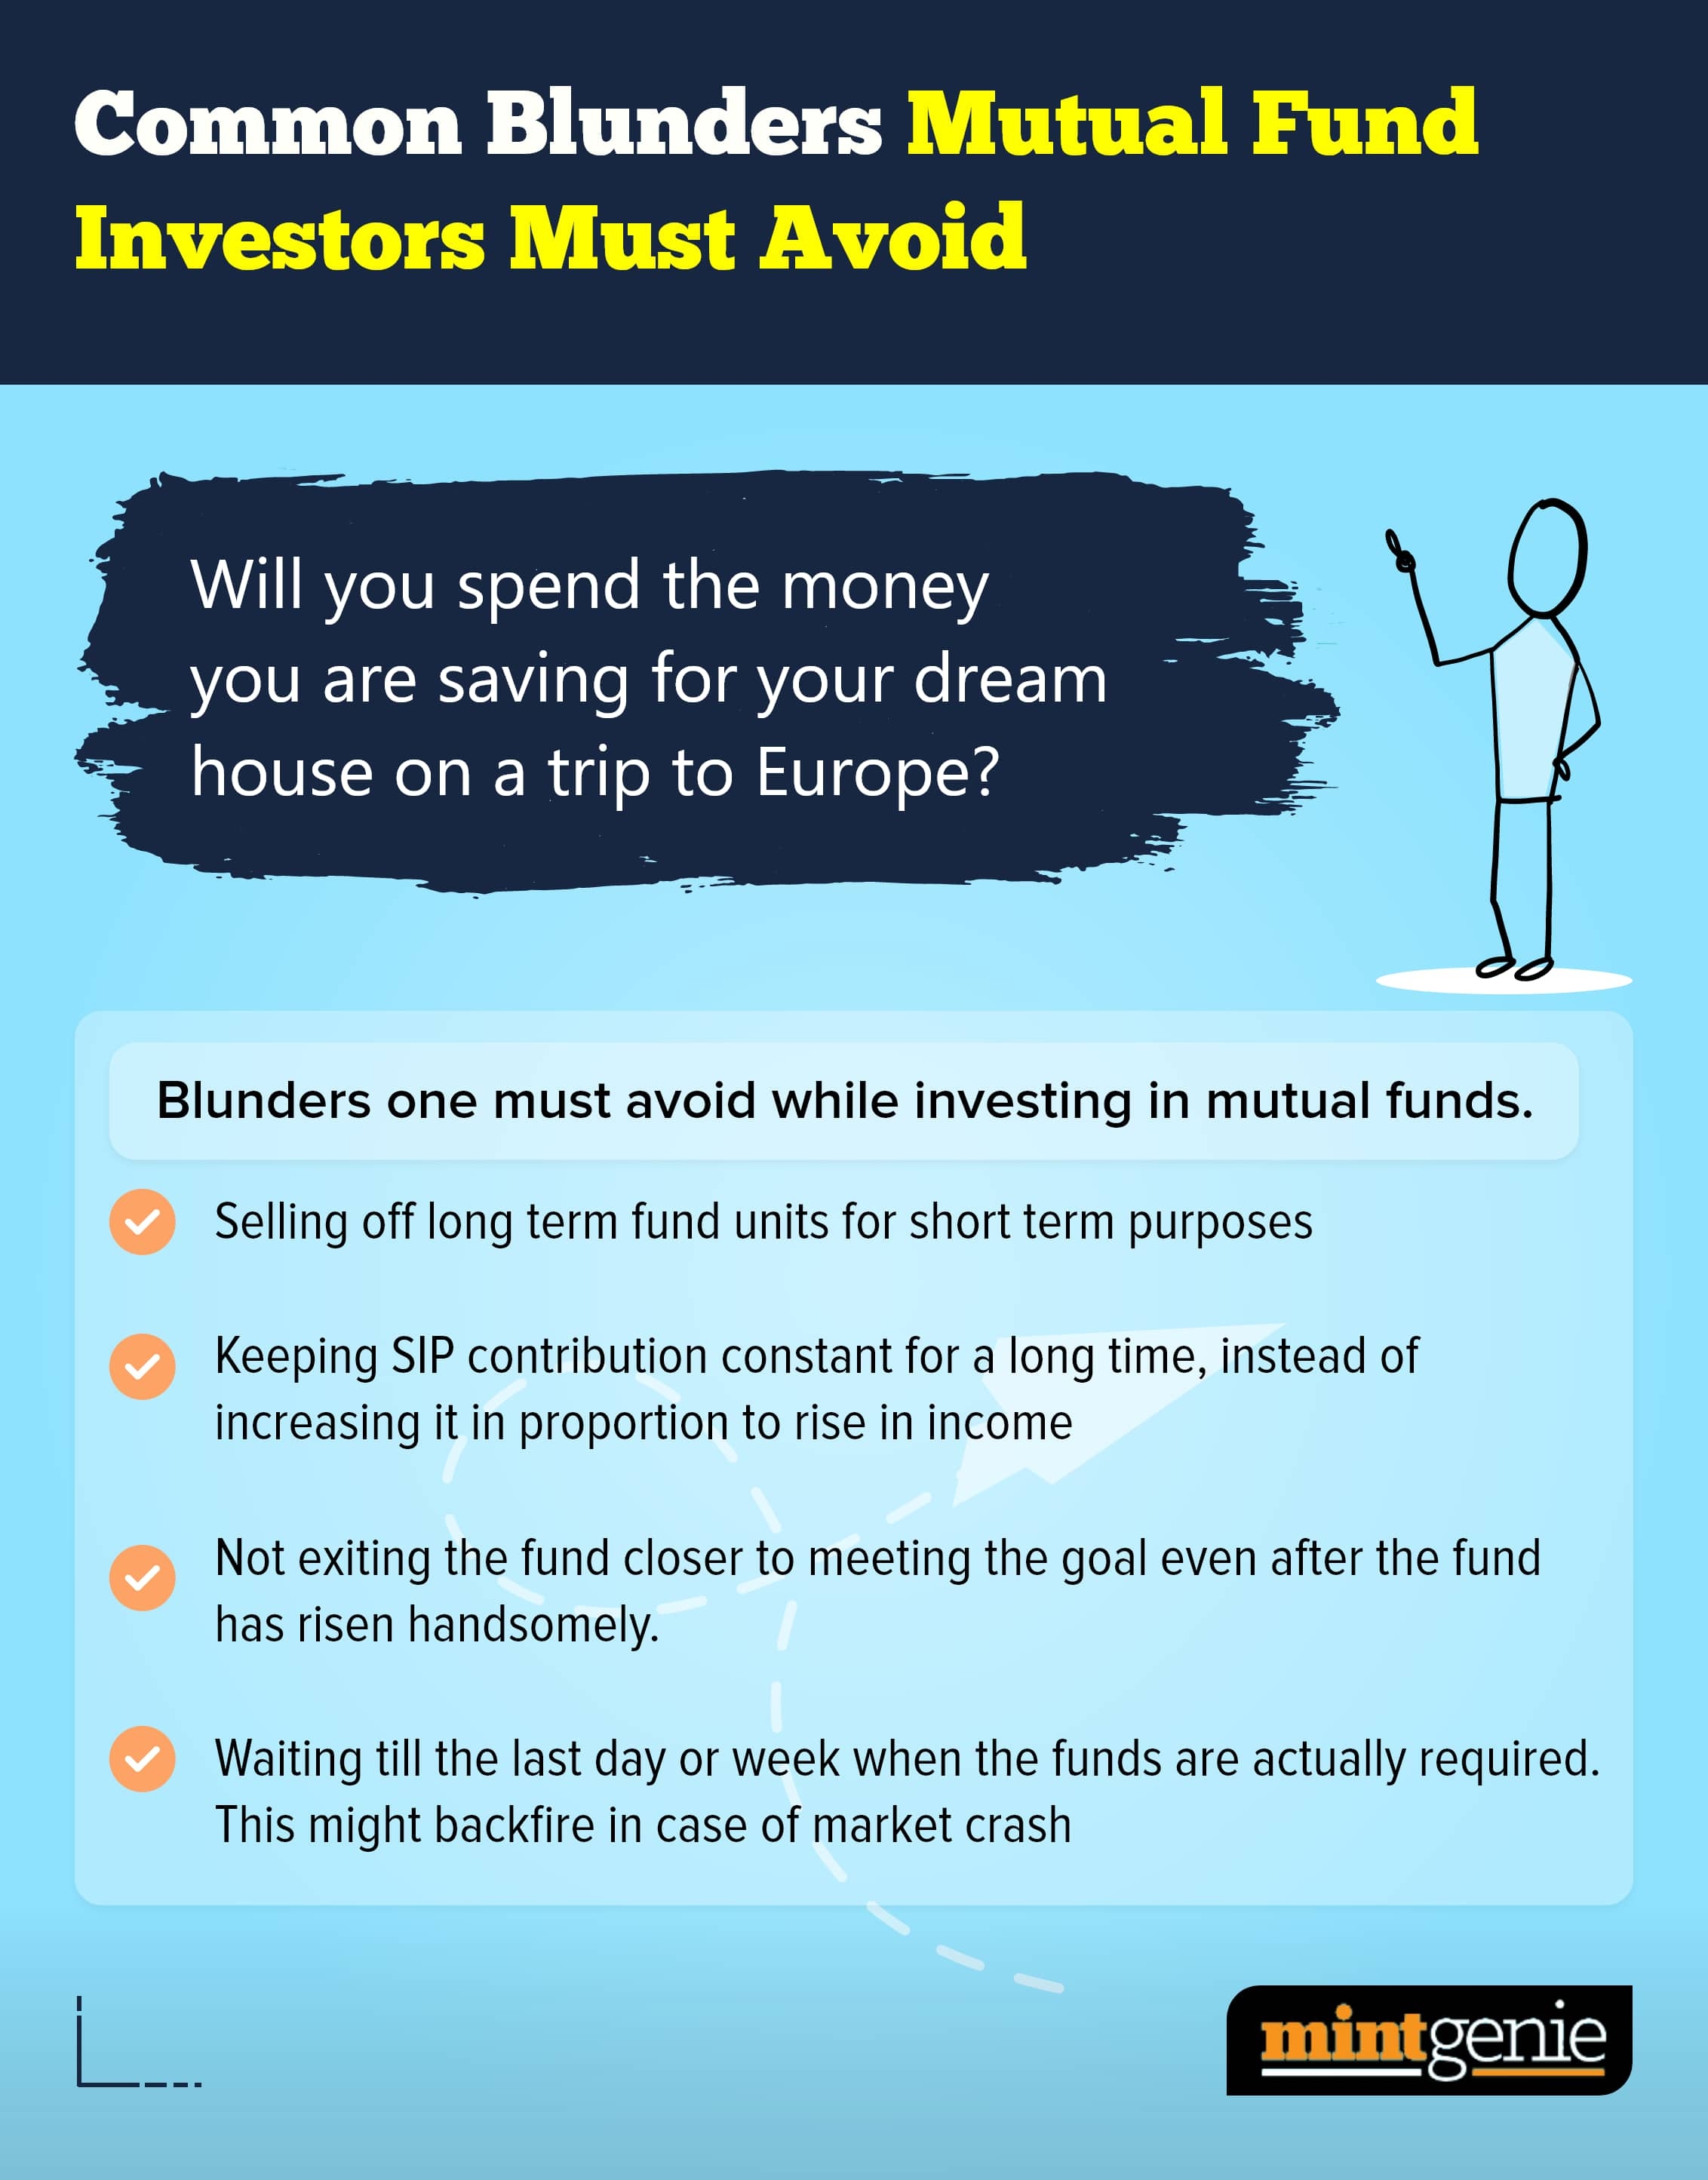 These are the common blunders which mutual fund investors must avoid. &nbsp;